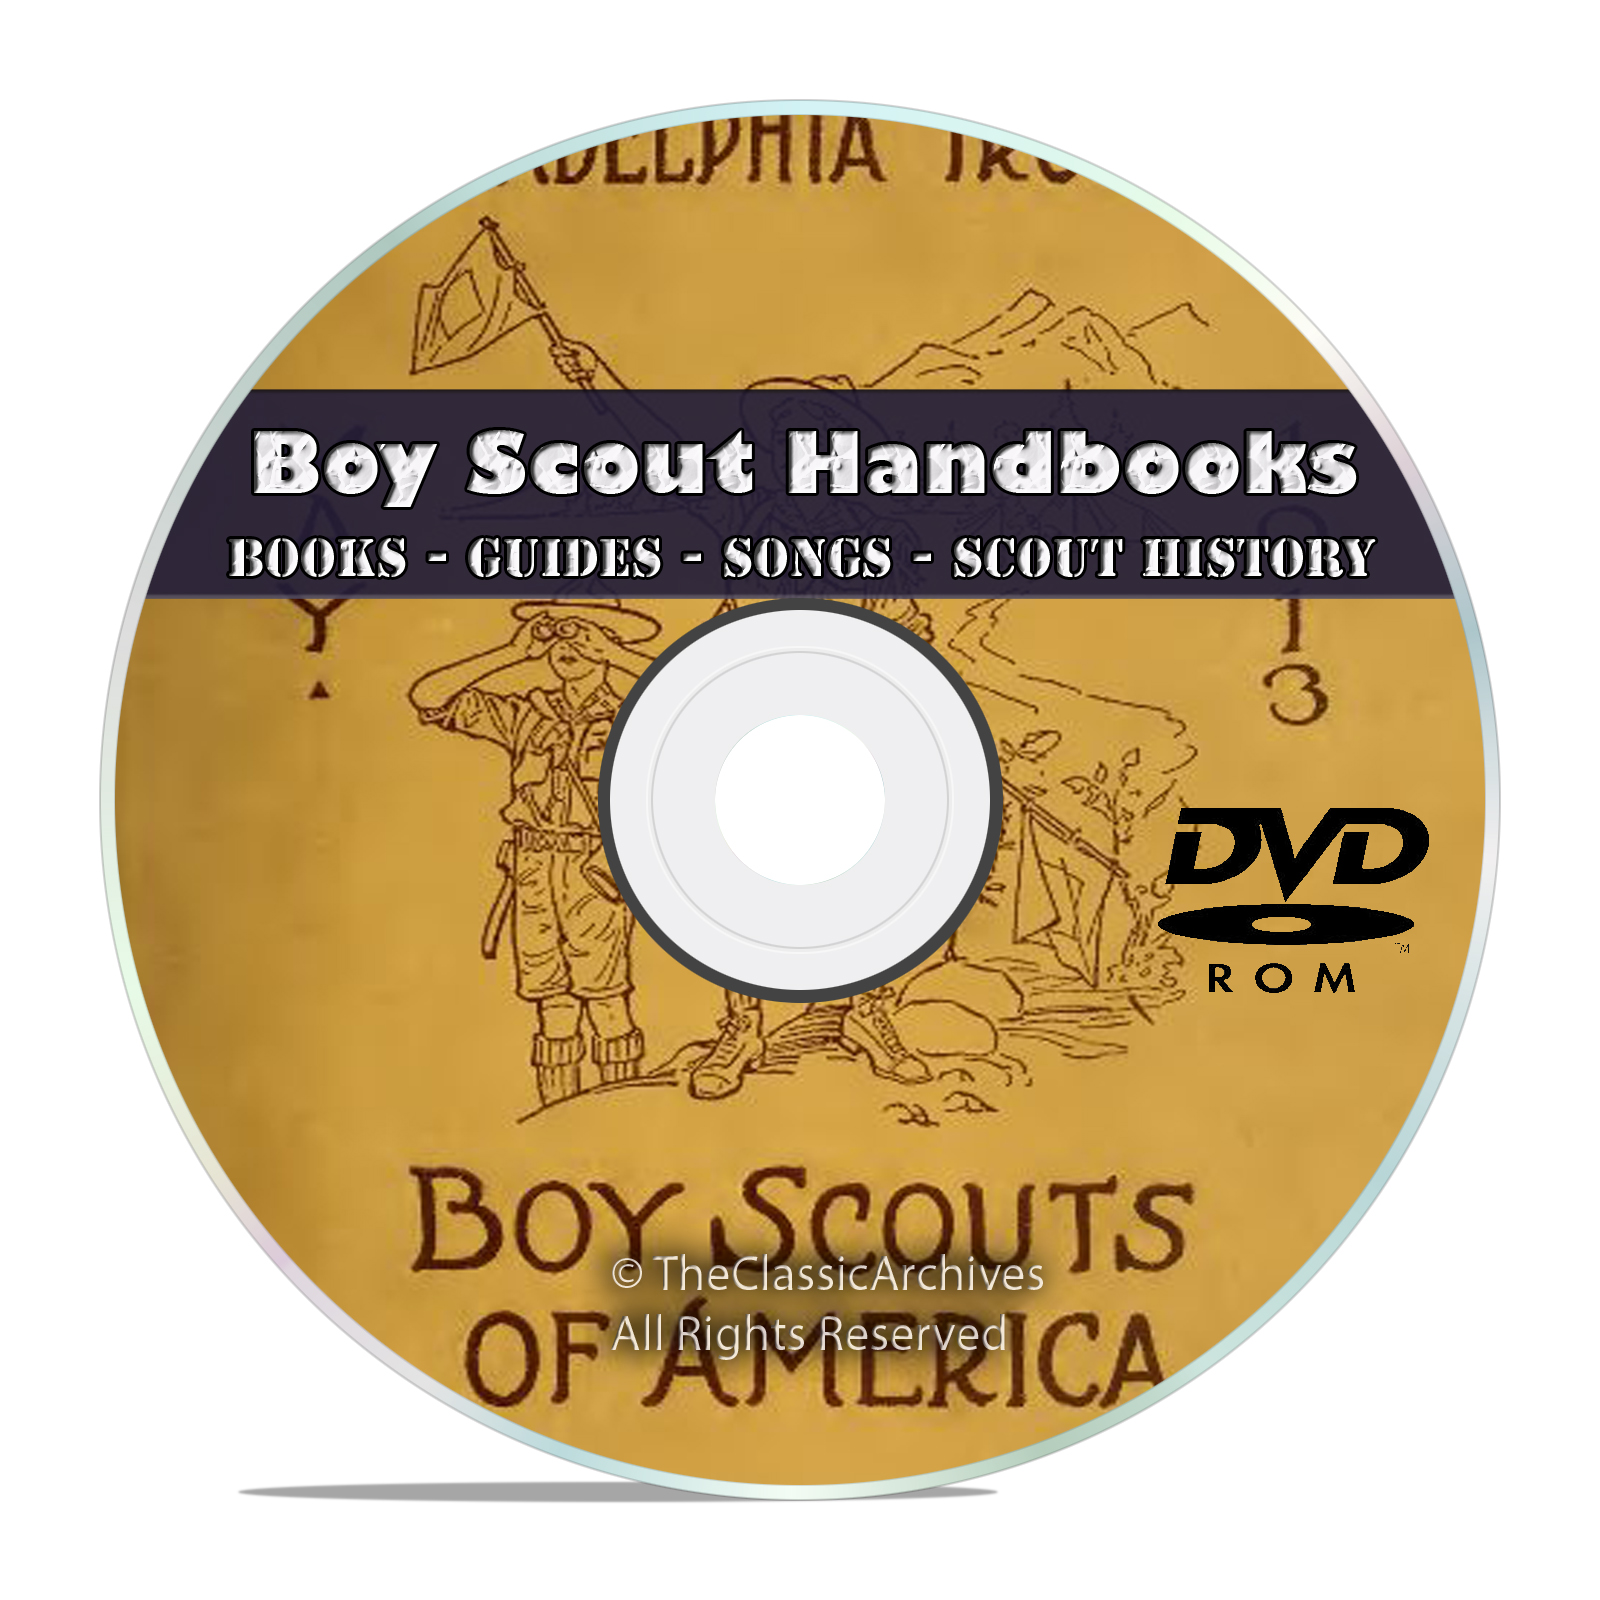 360 Boy Scout Handbooks Collection, Scouting, Songs, Magazines, Books DVD